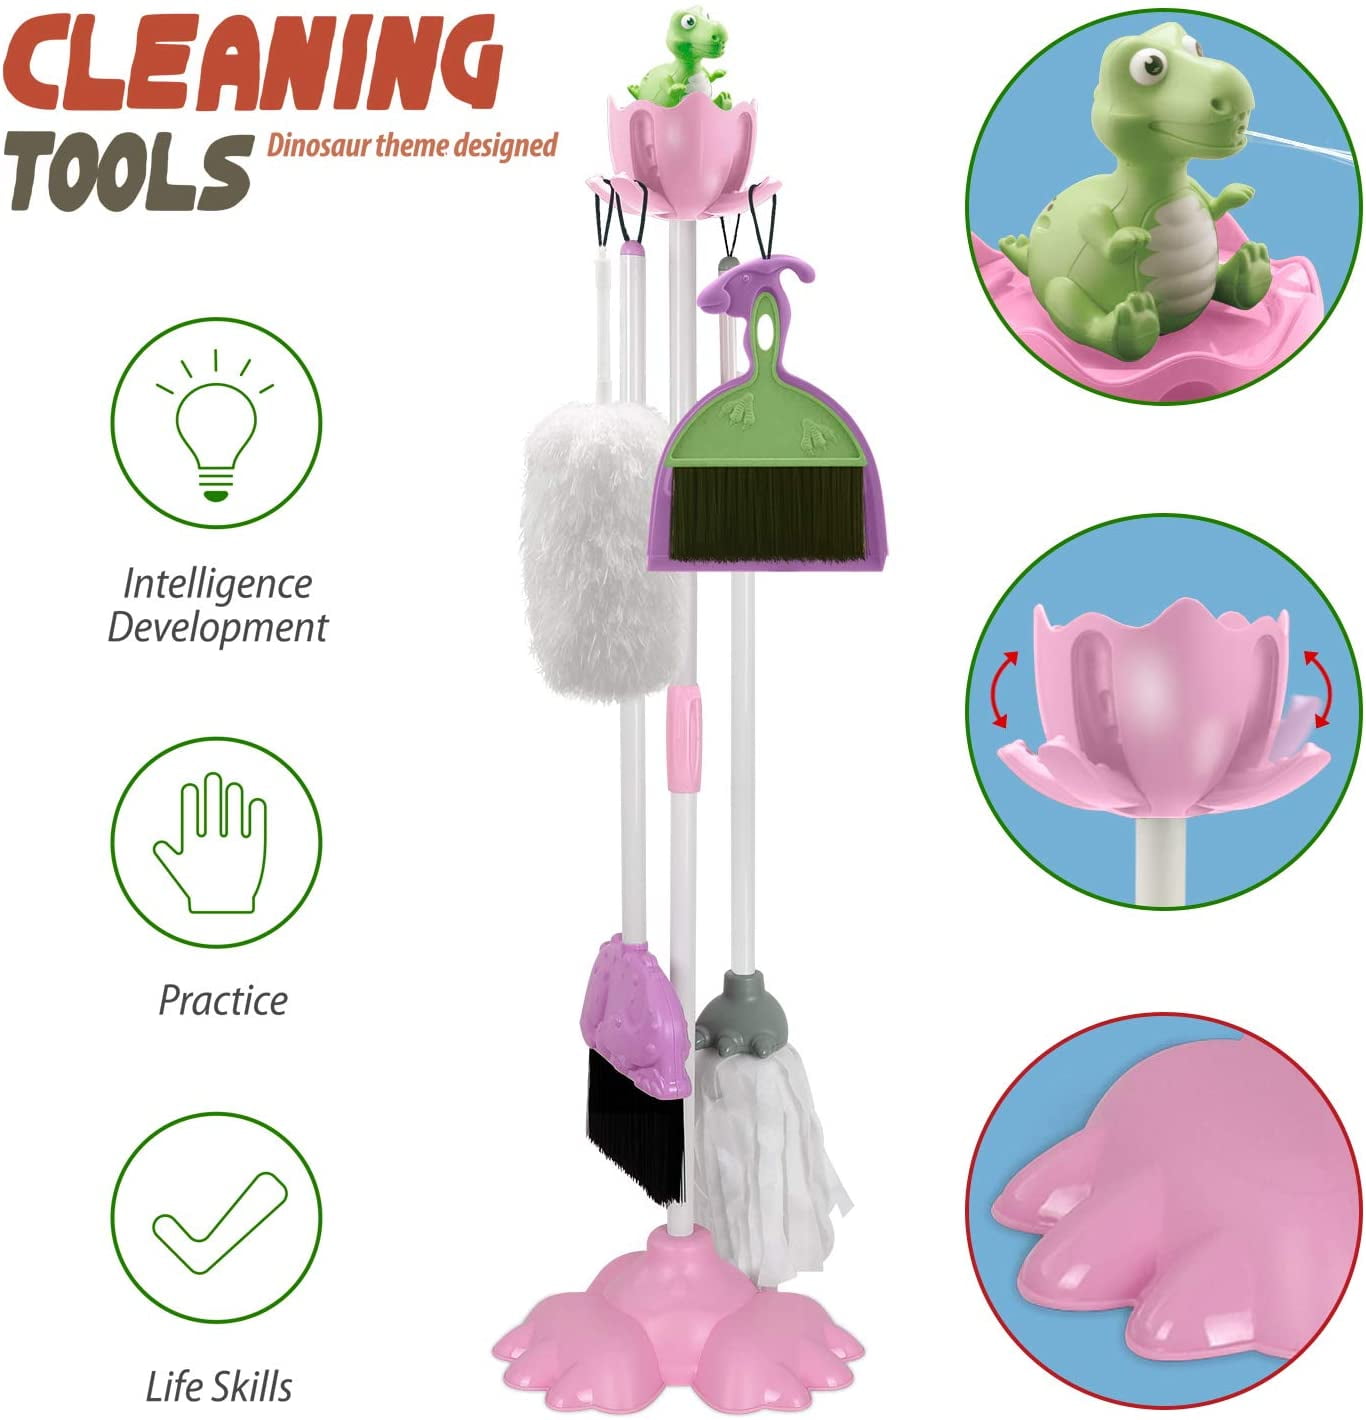 Ocamo Kids Cleaning Set Pretend Play Set for Toddlers Up to Age 4 Mop Broom Dustpan Hours of Fun Play-House Toys Green mop